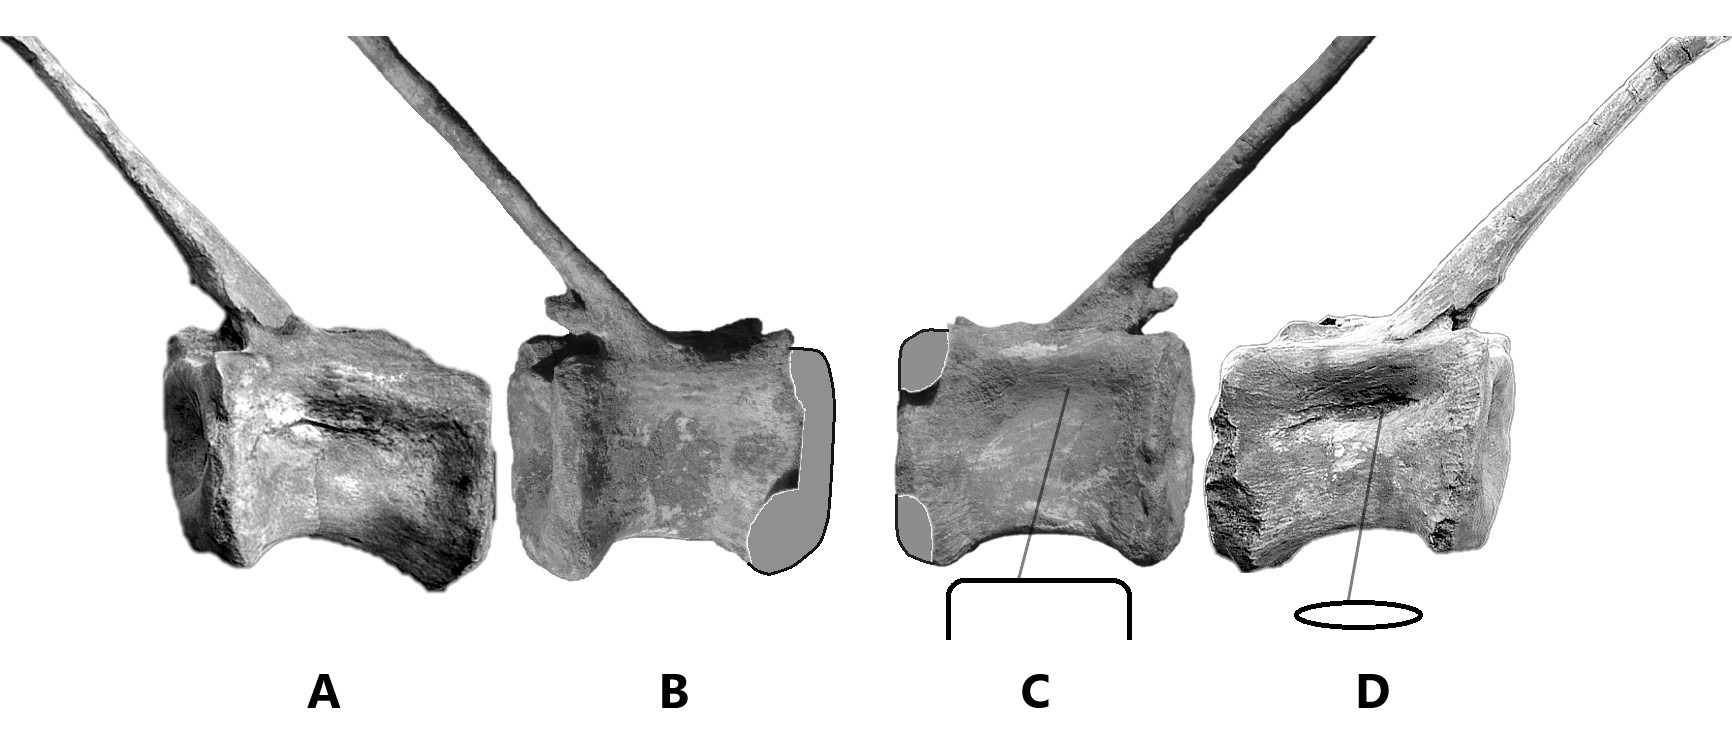 Side by side comparison of both distal caudal (close to the end of the tail) vertebrae of Morocco Spinosaurid probably similar species as Alpha Male 9109 (tentatively refer as Spinosaurus dorsojuvencus) and Spinosaurus aegyptiacus neotype (FSAC-KK 11888)[6][7]. From left to right: A. Distal caudal vertebra (FSAC-KK 11888, refer as position Ca31) in right lateral view; B. Distal caudal vertebra (R175141271886-2202) of Spinosaurid probably similar species as Alpha Male 9109 in right lateral view; C. Distal caudal vertebra (R175141271886-2202) of Spinosaurid probably similar species as Alpha Male 9109 in left lateral view, the centrum appear lack of pneumatic fossae development, smooth and flat surface appearance; D. Distal caudal vertebra (FSAC-KK 11888, refer as position Ca31) in left lateral view, pneumatic fossae are well developed on vertebra centrum, the bottom centrum appear cylinder shape.